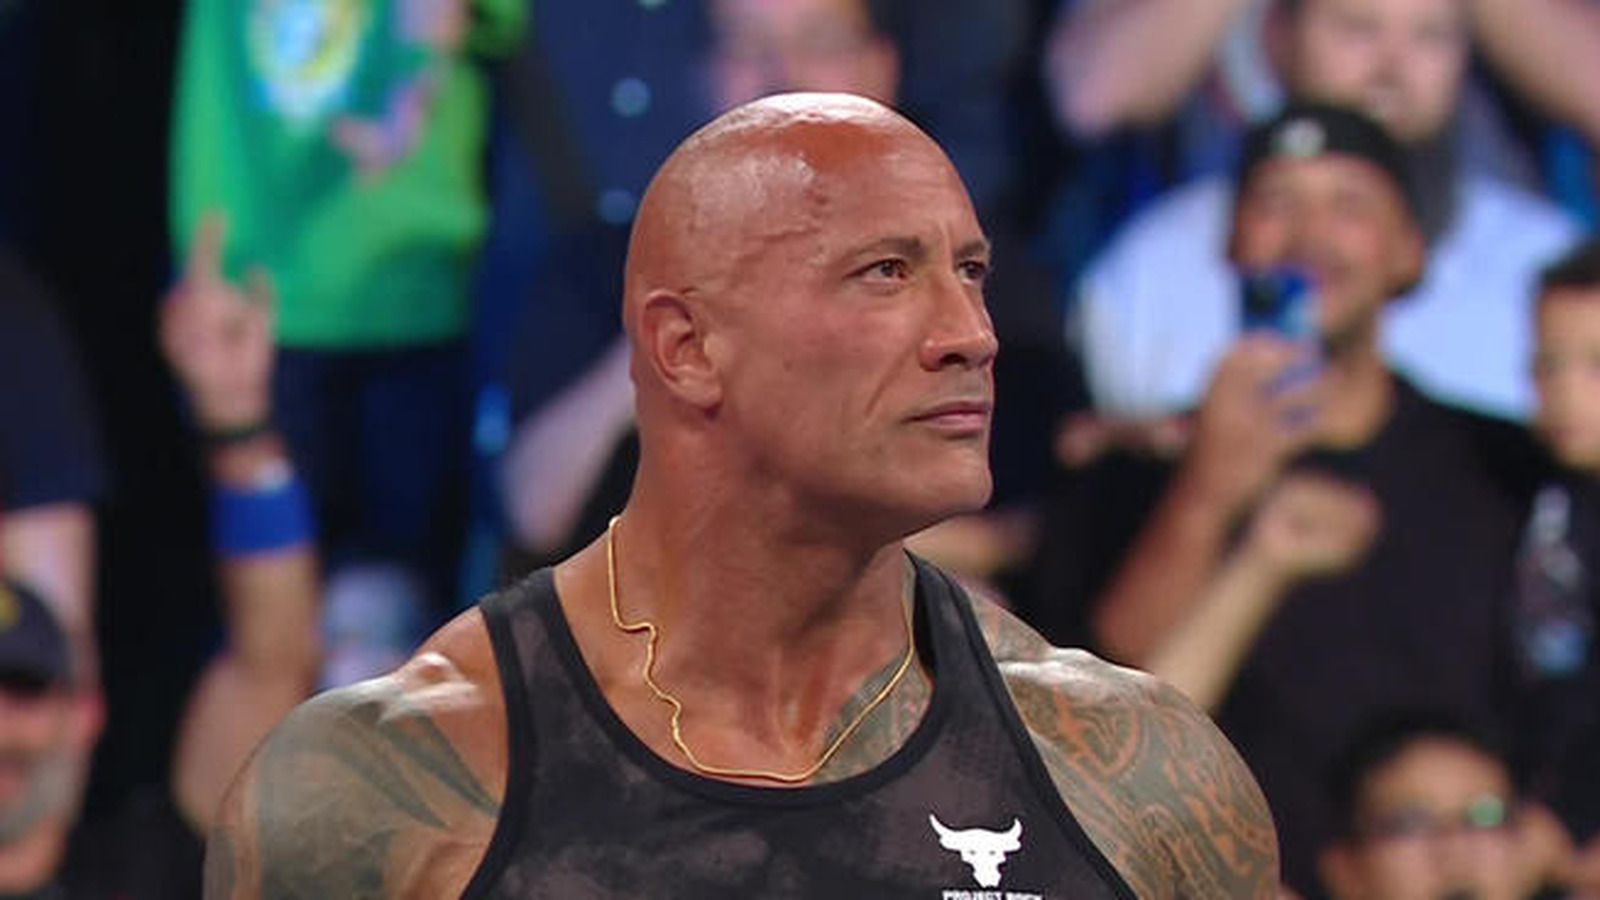 Details Behind Dwayne Johnson's WWE SmackDown Appearance, Possible WrestleMania Plans